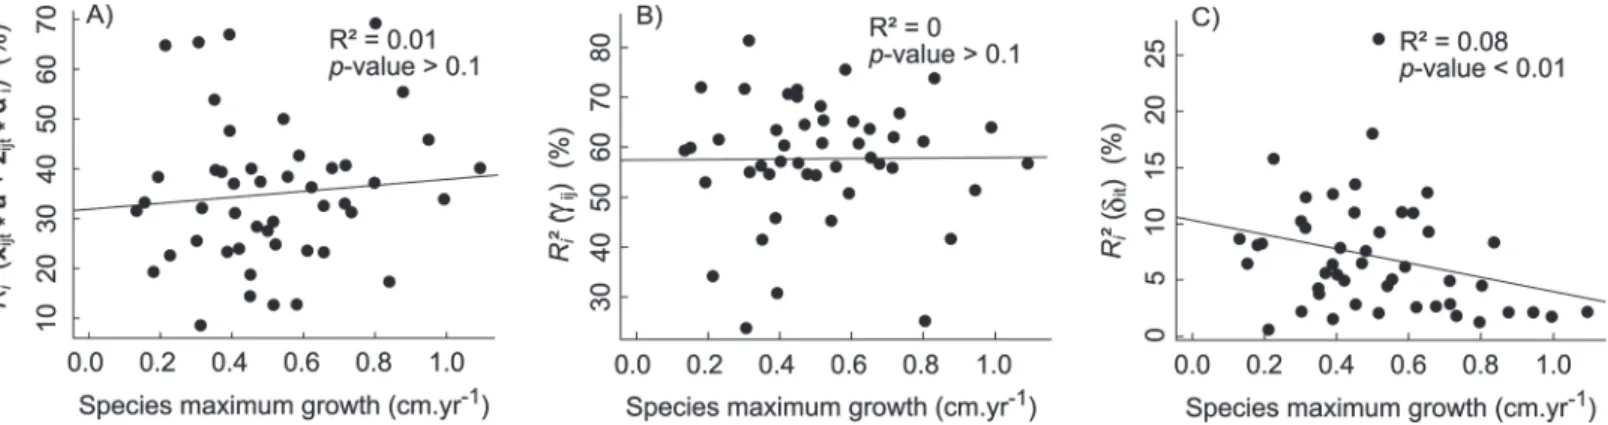 Fig 5. Species growth responses to competition and tree size overlap. Predicted growth response to competition (A) and predicted ontogenetic growth trajectories (B) at standardized conditions (i.e